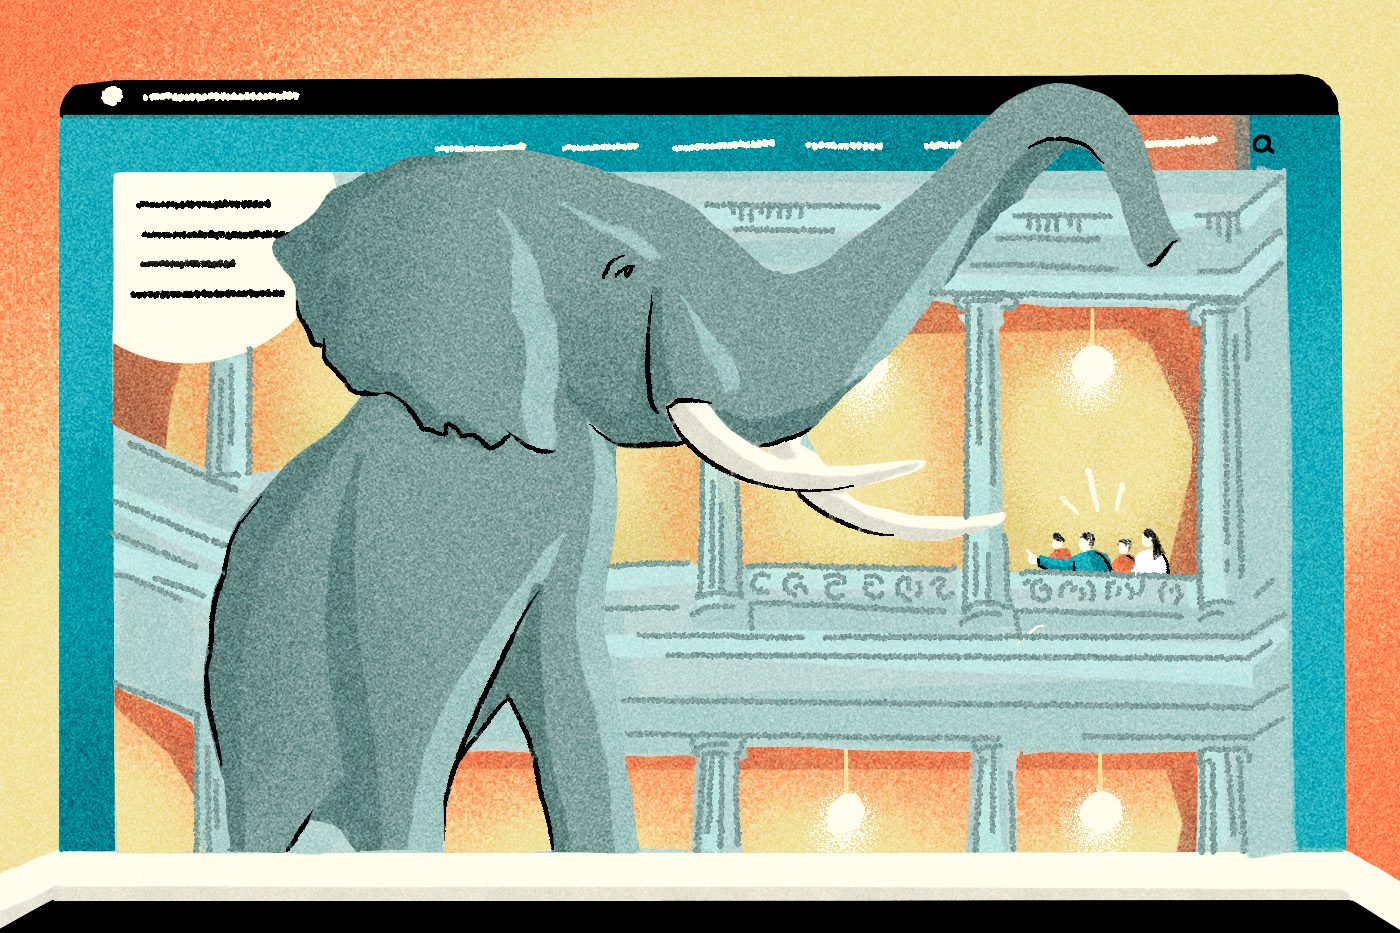 Illustrated recreation of the Natural History Museum's homepage